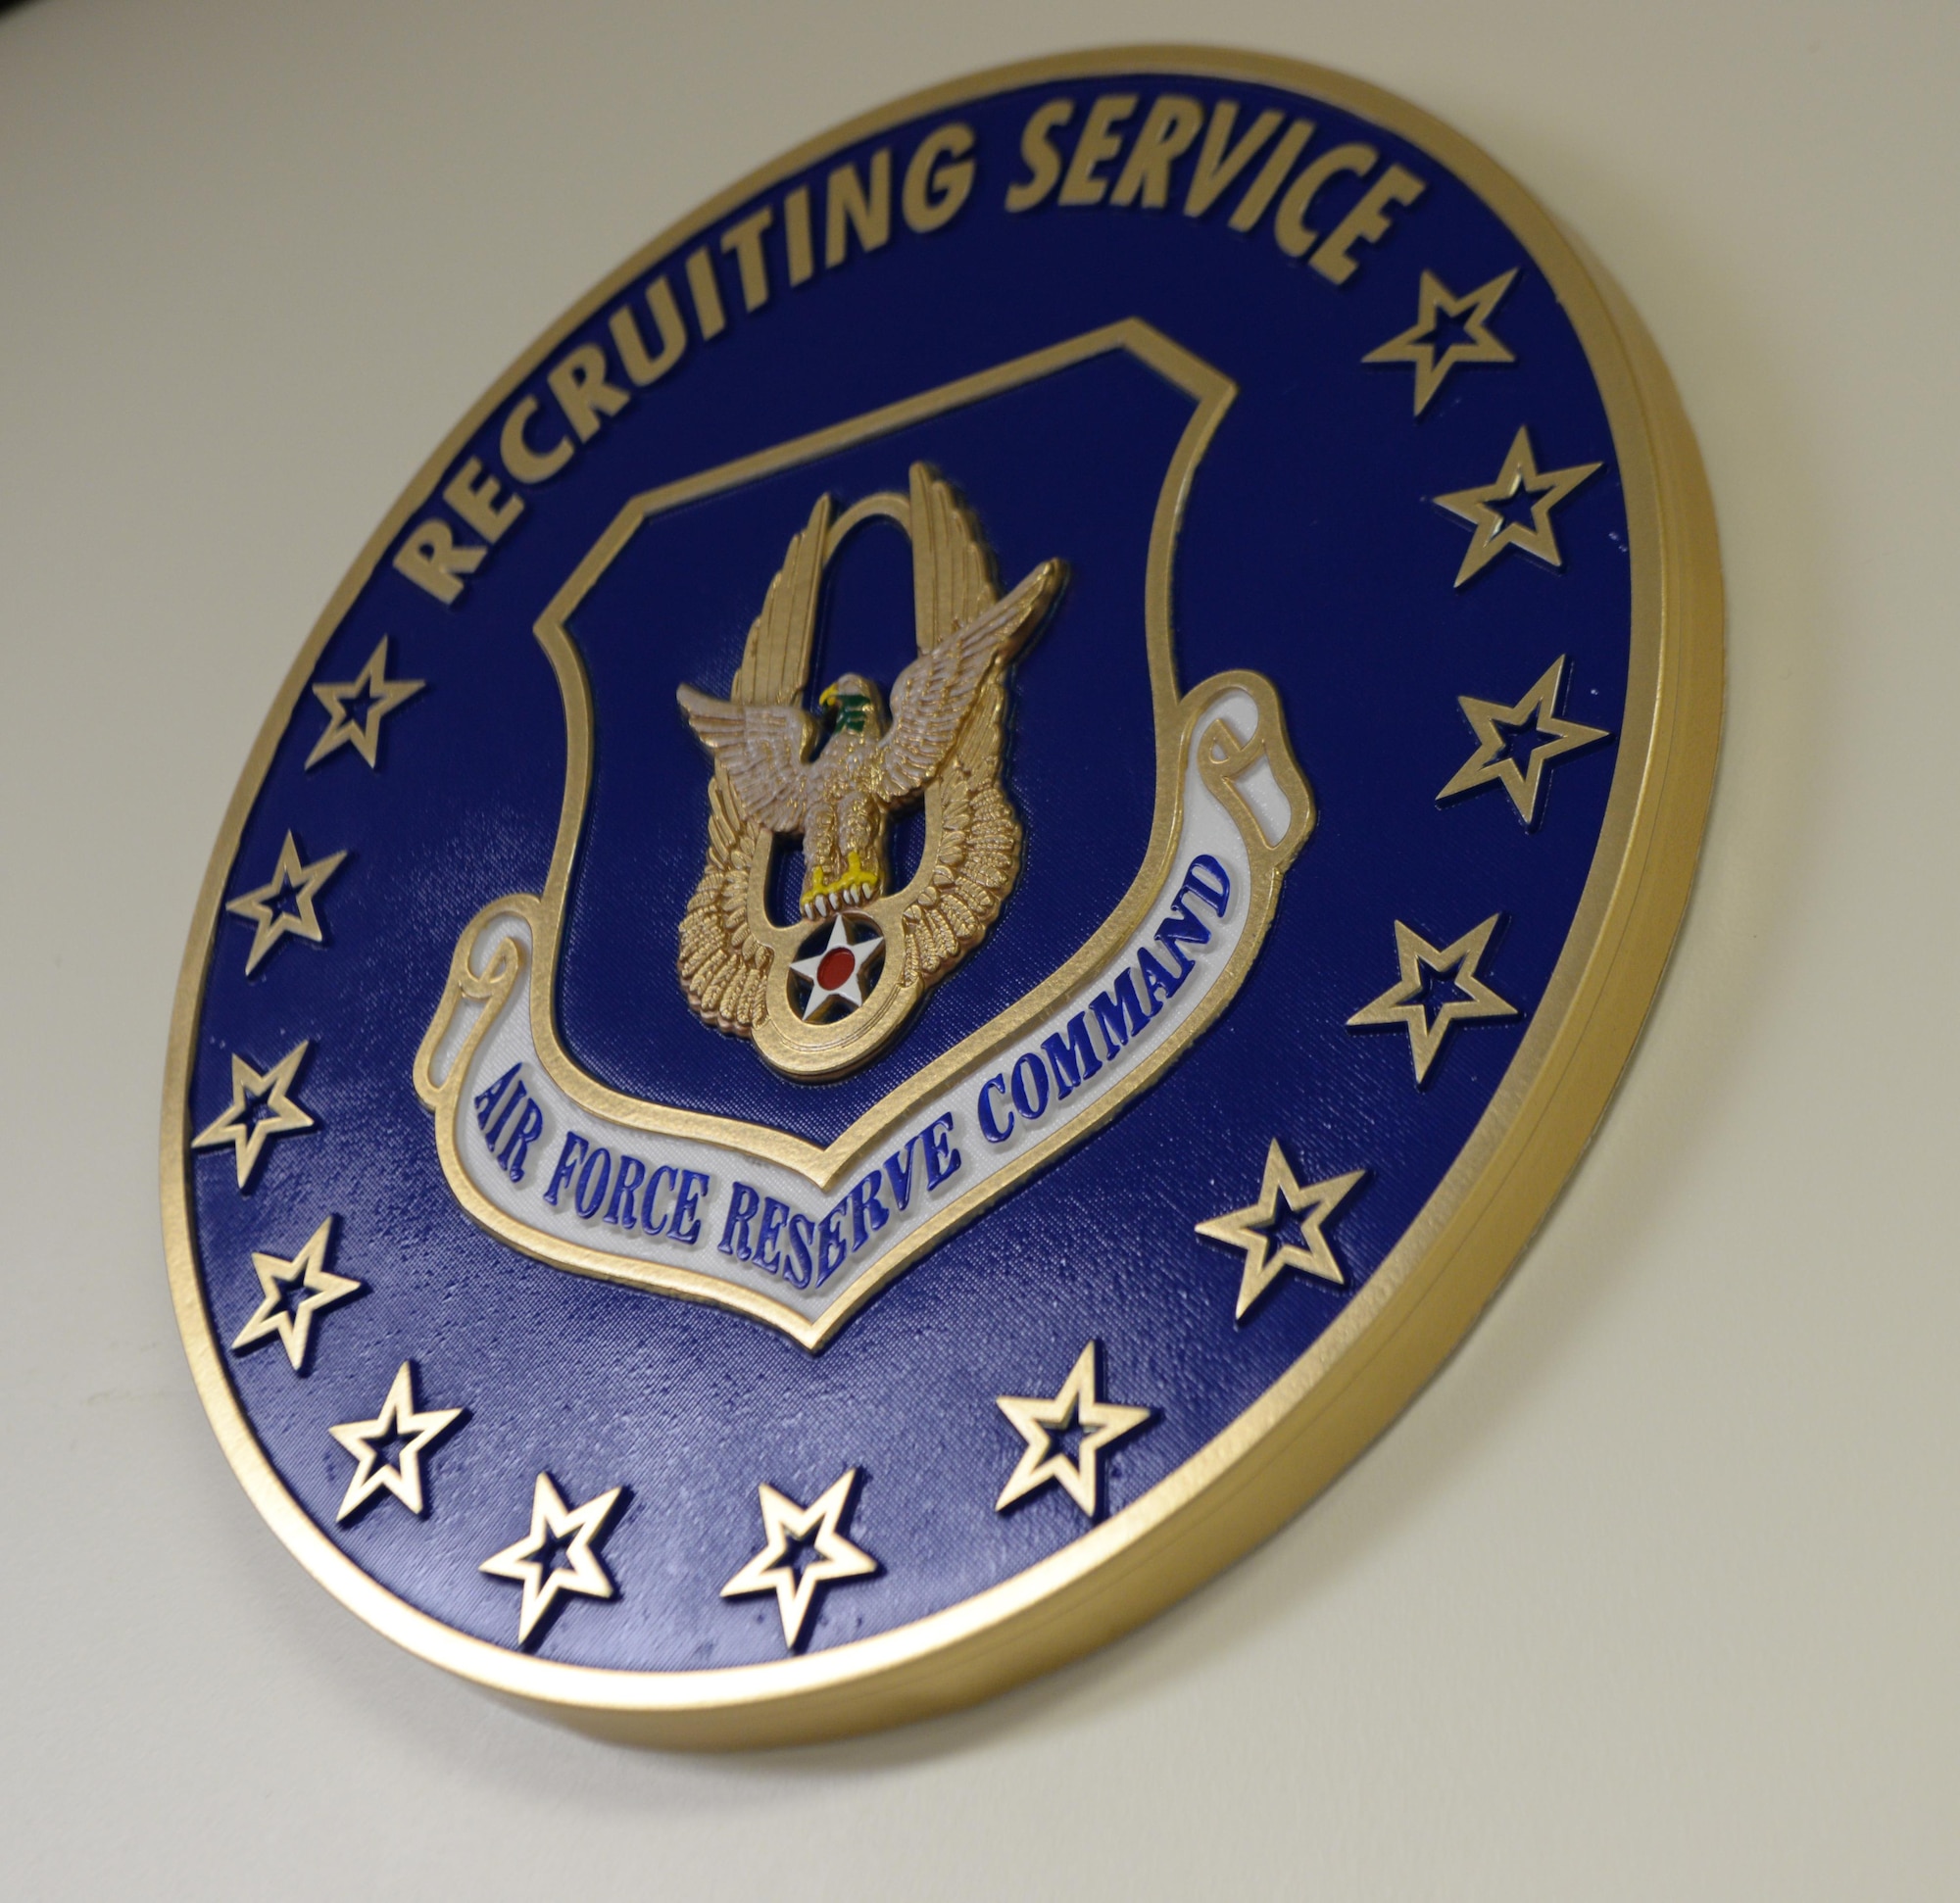 The logo for the U.S. Air Force Reserves command sits in the office of U.S. Air Force Master Sgt. Brandy Venson, an in-service recruiter assigned to the 97th Air Mobility Wing, November 20, 2017, Altus Air Force base, Okla.